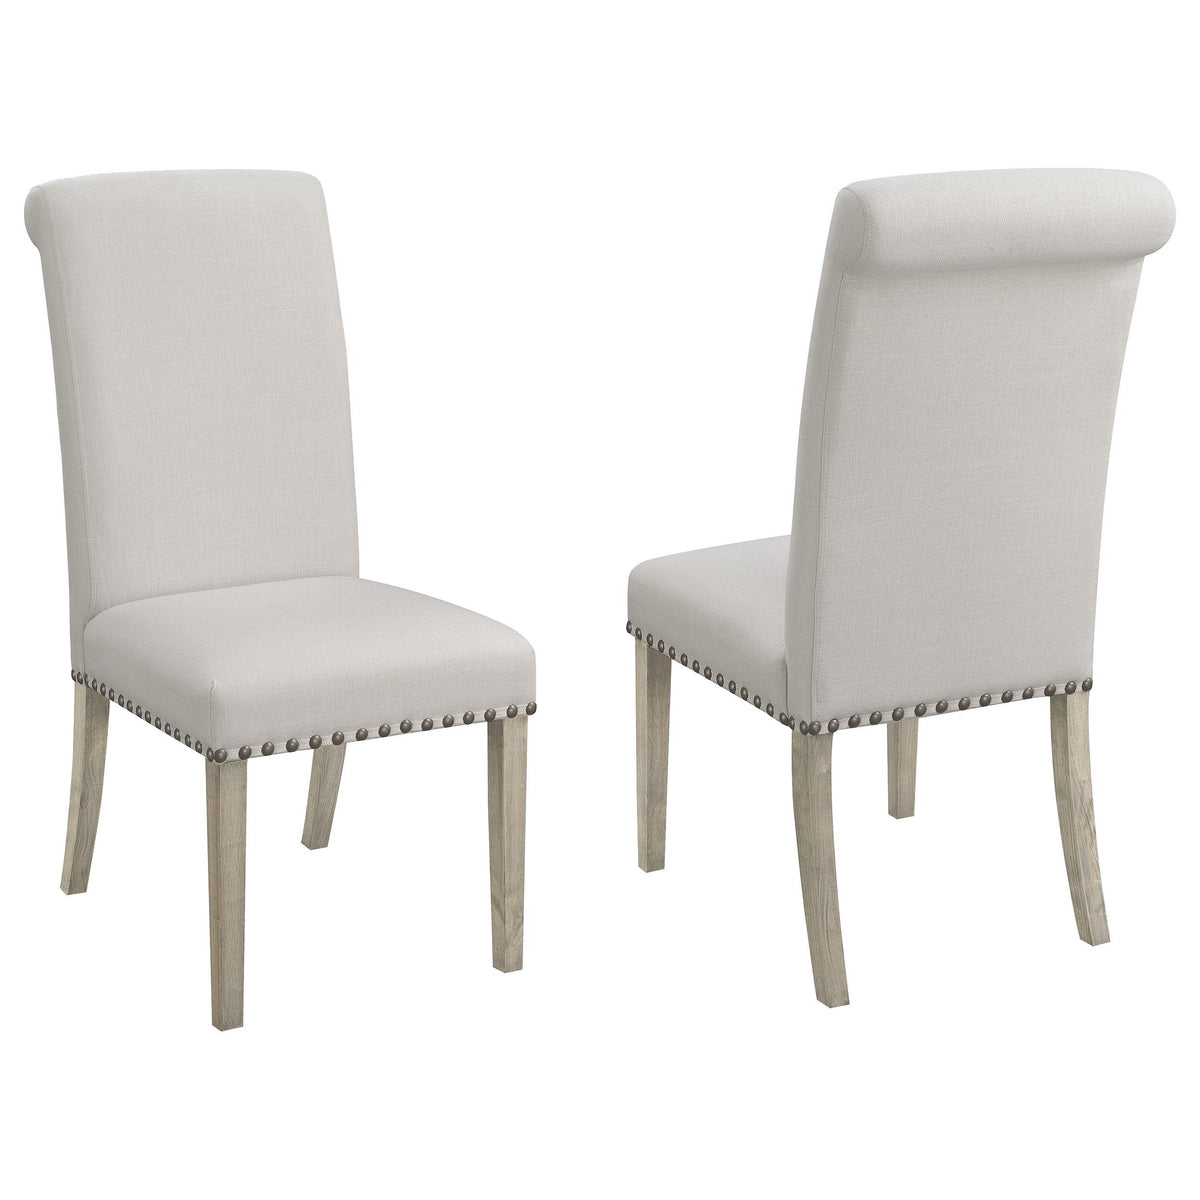 Salem Upholstered Side Chairs Rustic Smoke and Grey (Set of 2) Salem Upholstered Side Chairs Rustic Smoke and Grey (Set of 2) Half Price Furniture